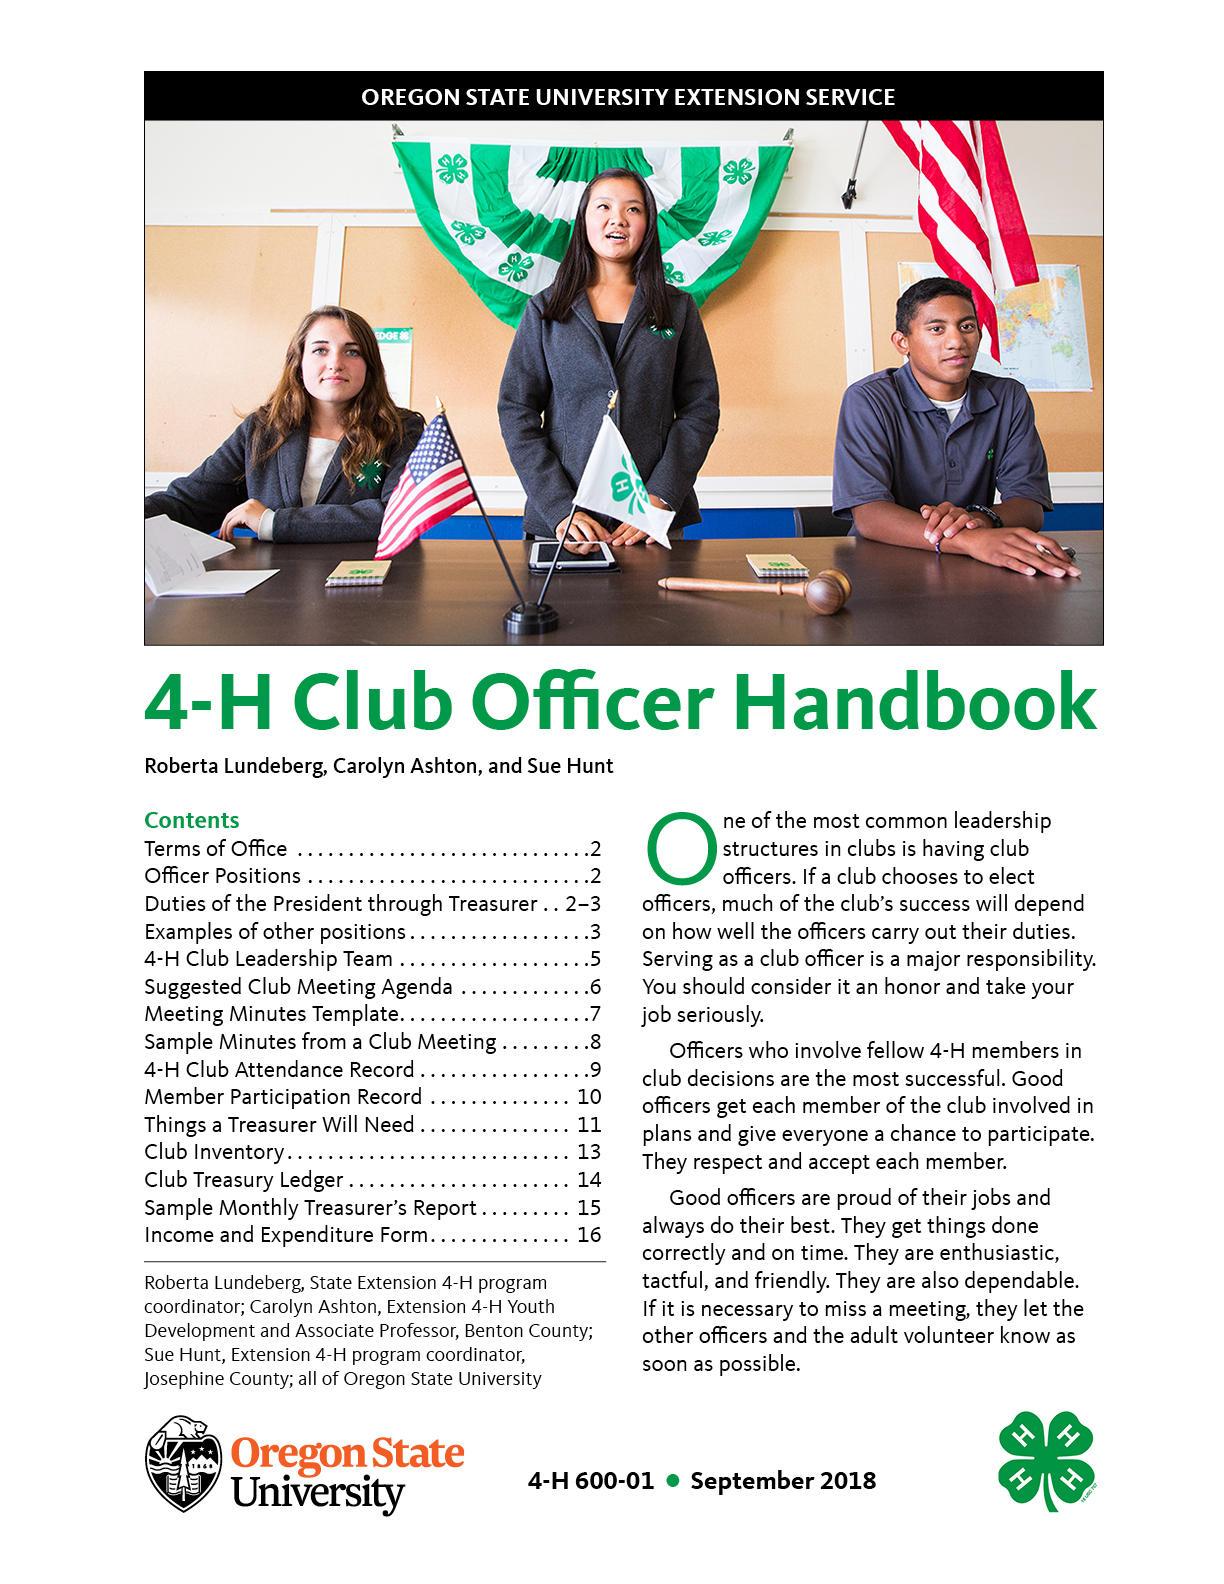 Cover image of "4-H Club Officer Handbook" publication